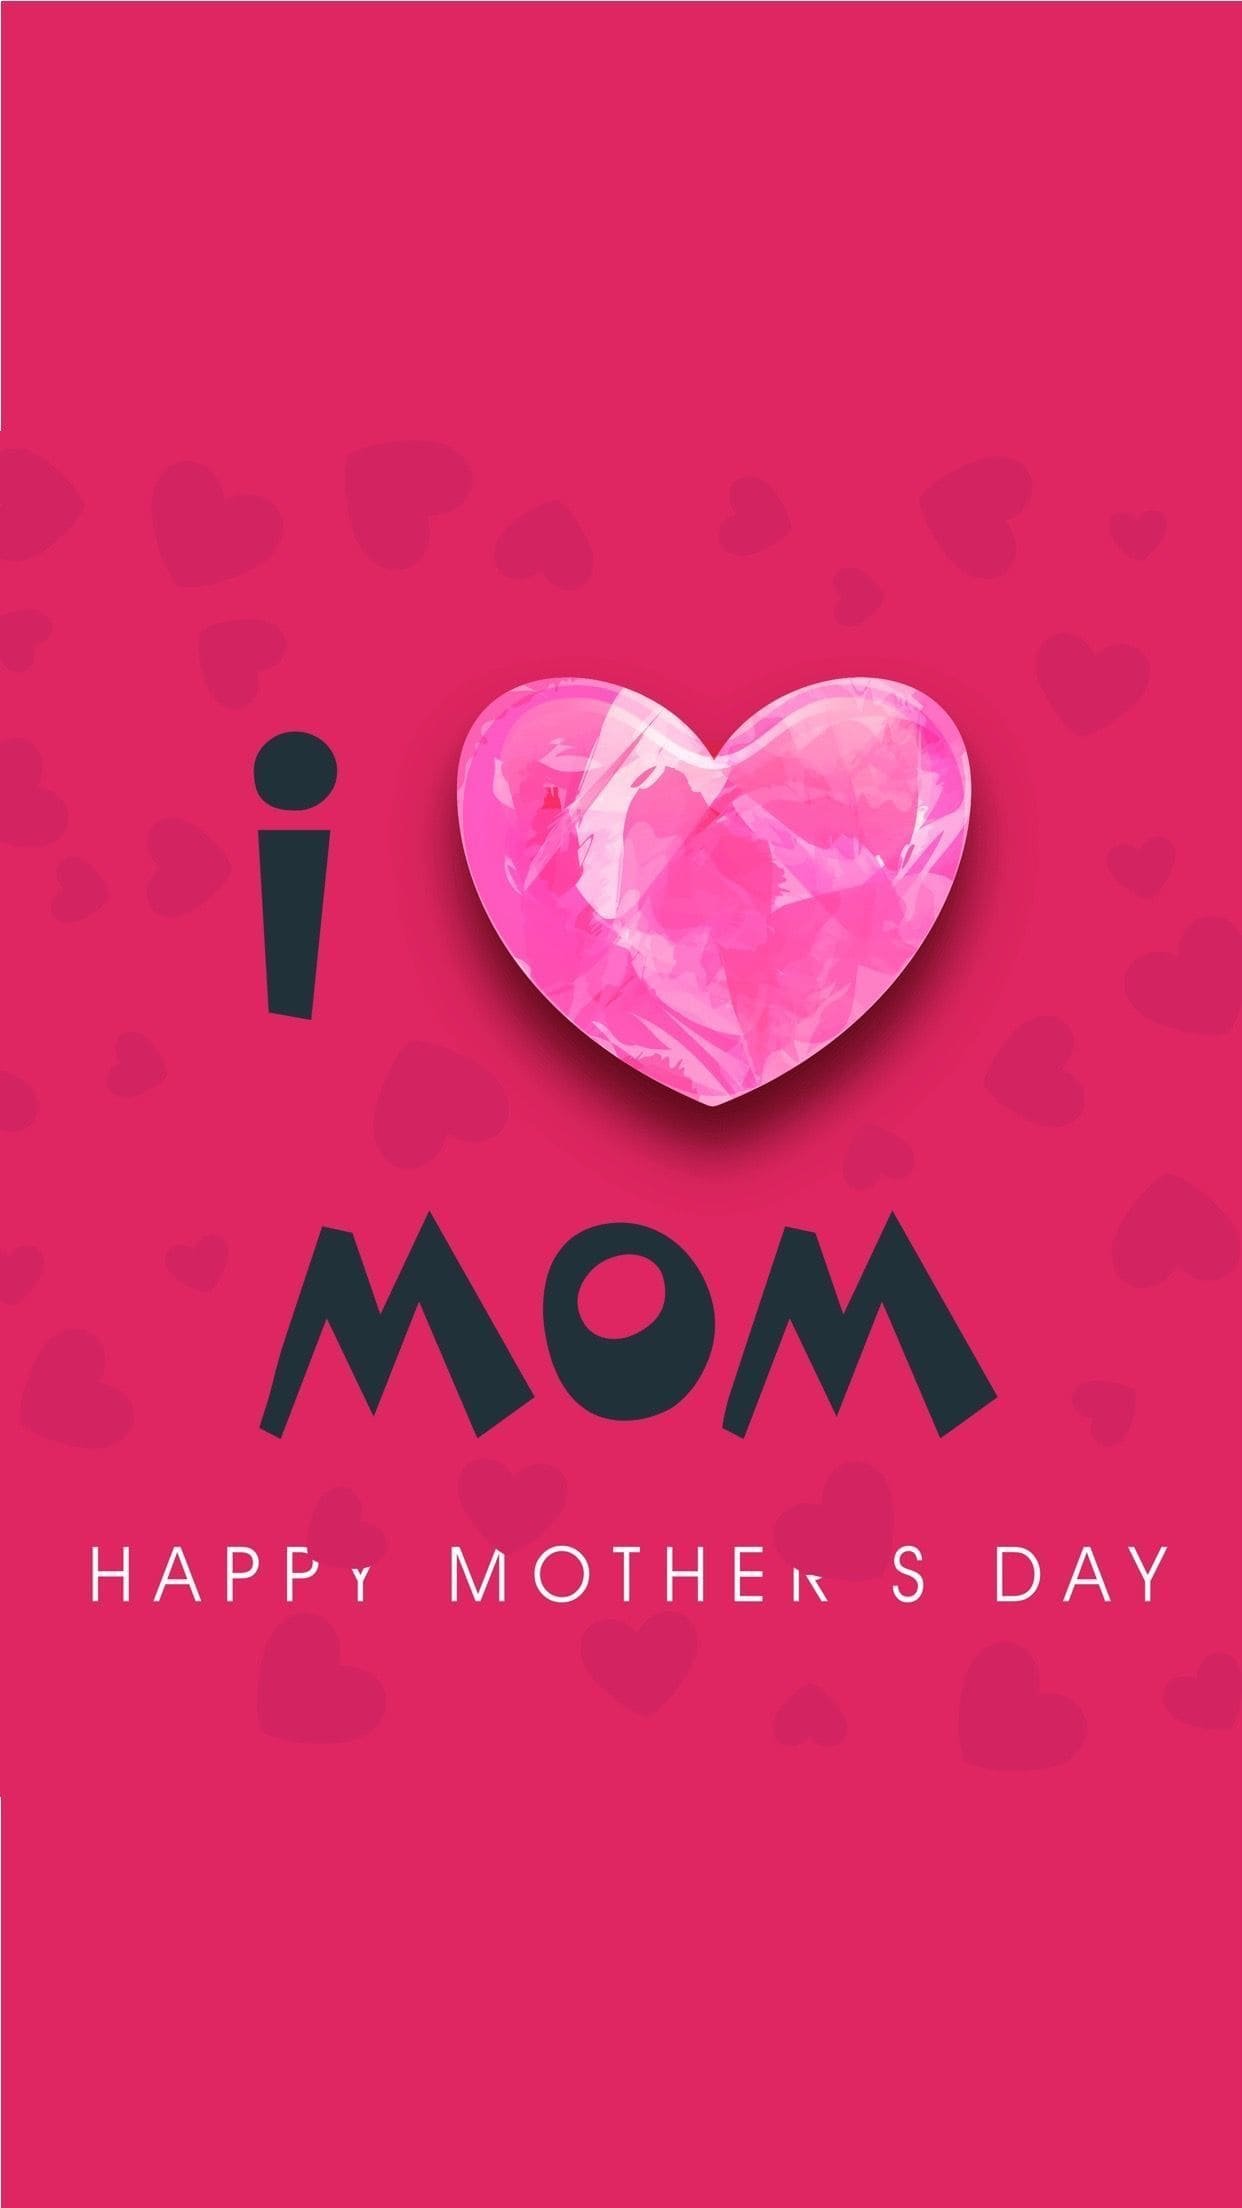 happy mothers day images best mom ever pink heart 2022 iphone 13 pro max wallpaper 5